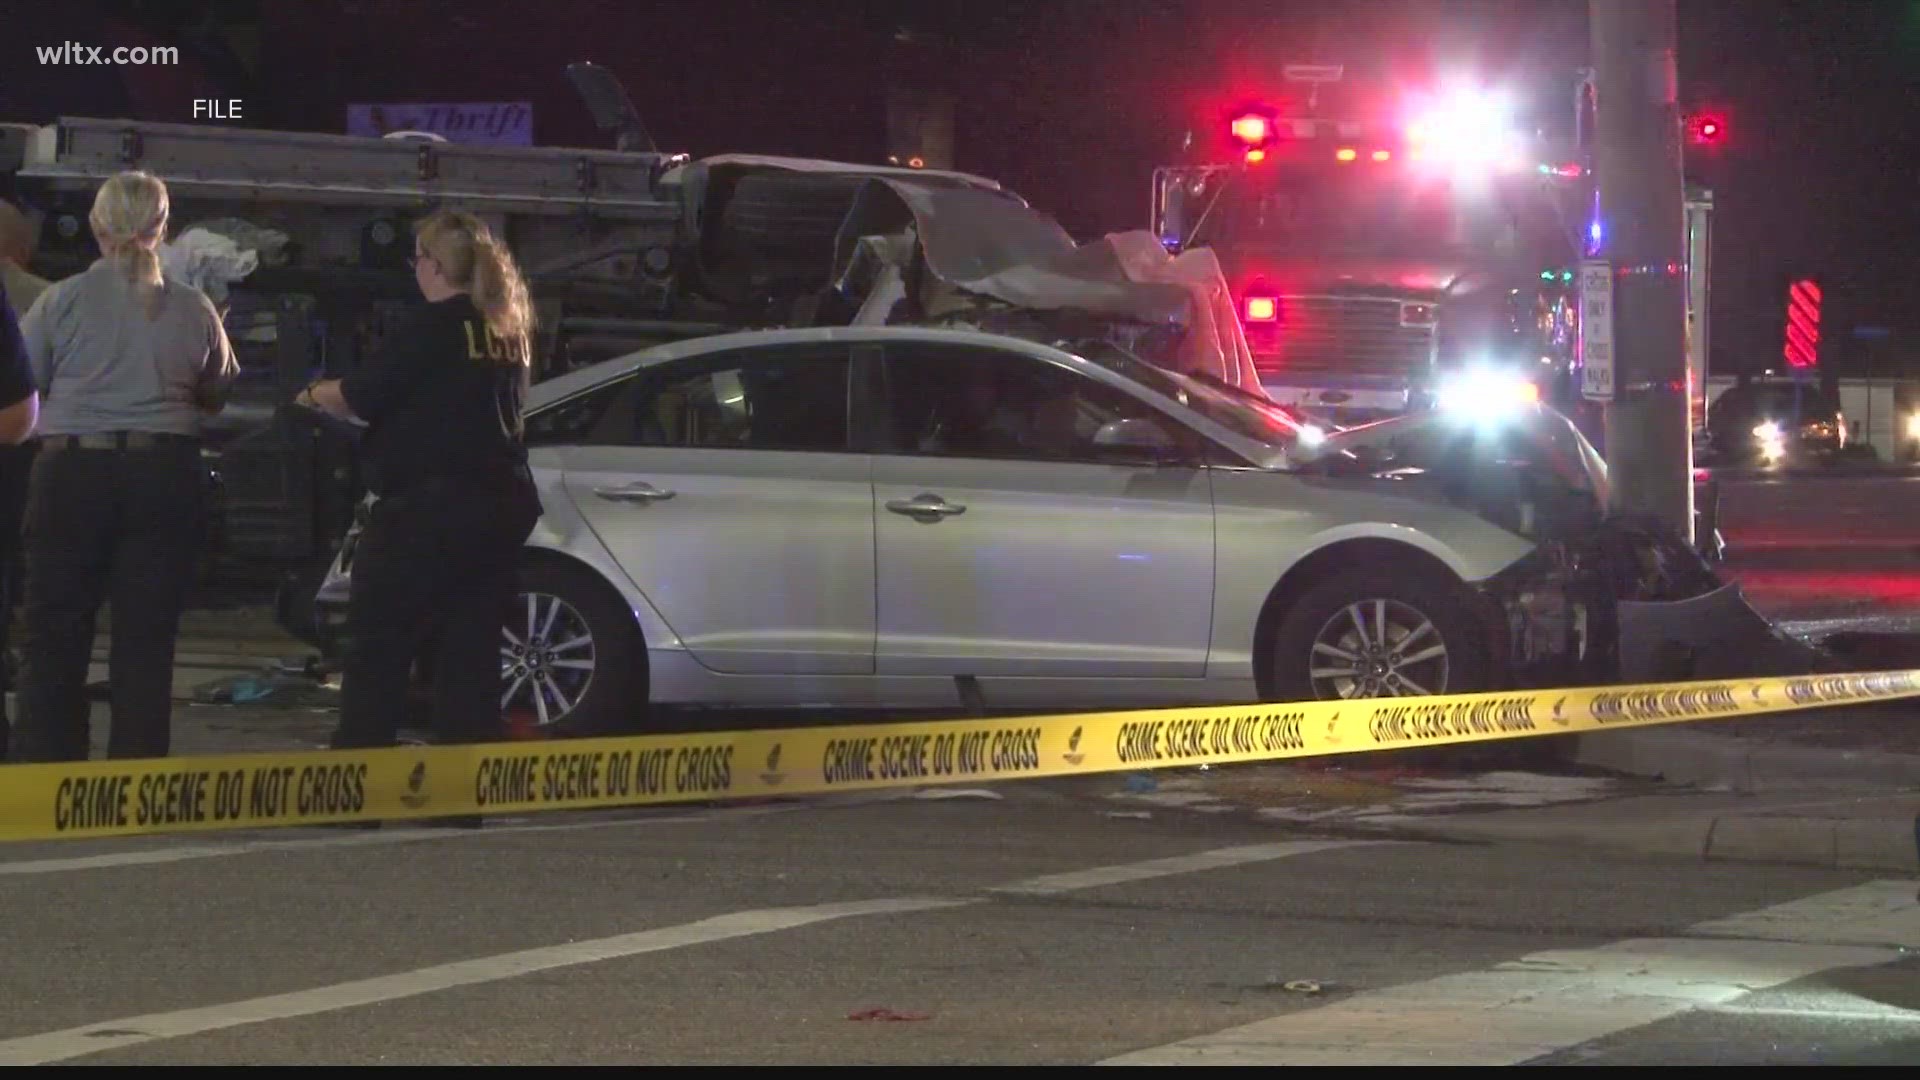 Friday night two people were killed in a crash. One man has been charged.